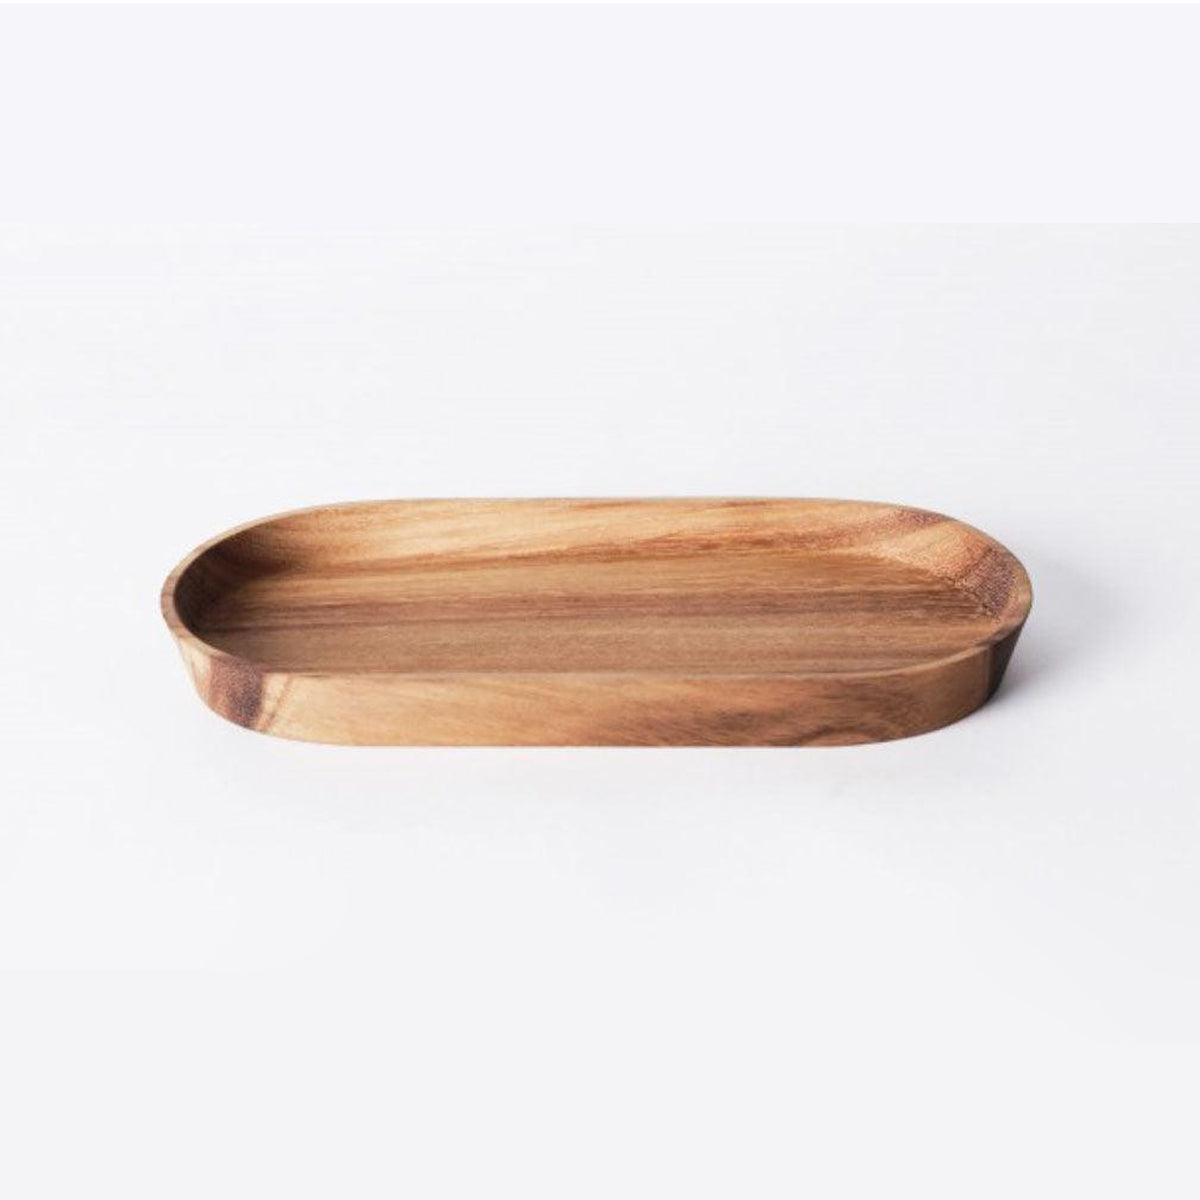 https://cdn.shopify.com/s/files/1/0566/4158/5231/products/chabatree_Limpid_Oval_Tray_M__18171.jpg?v=1678389803